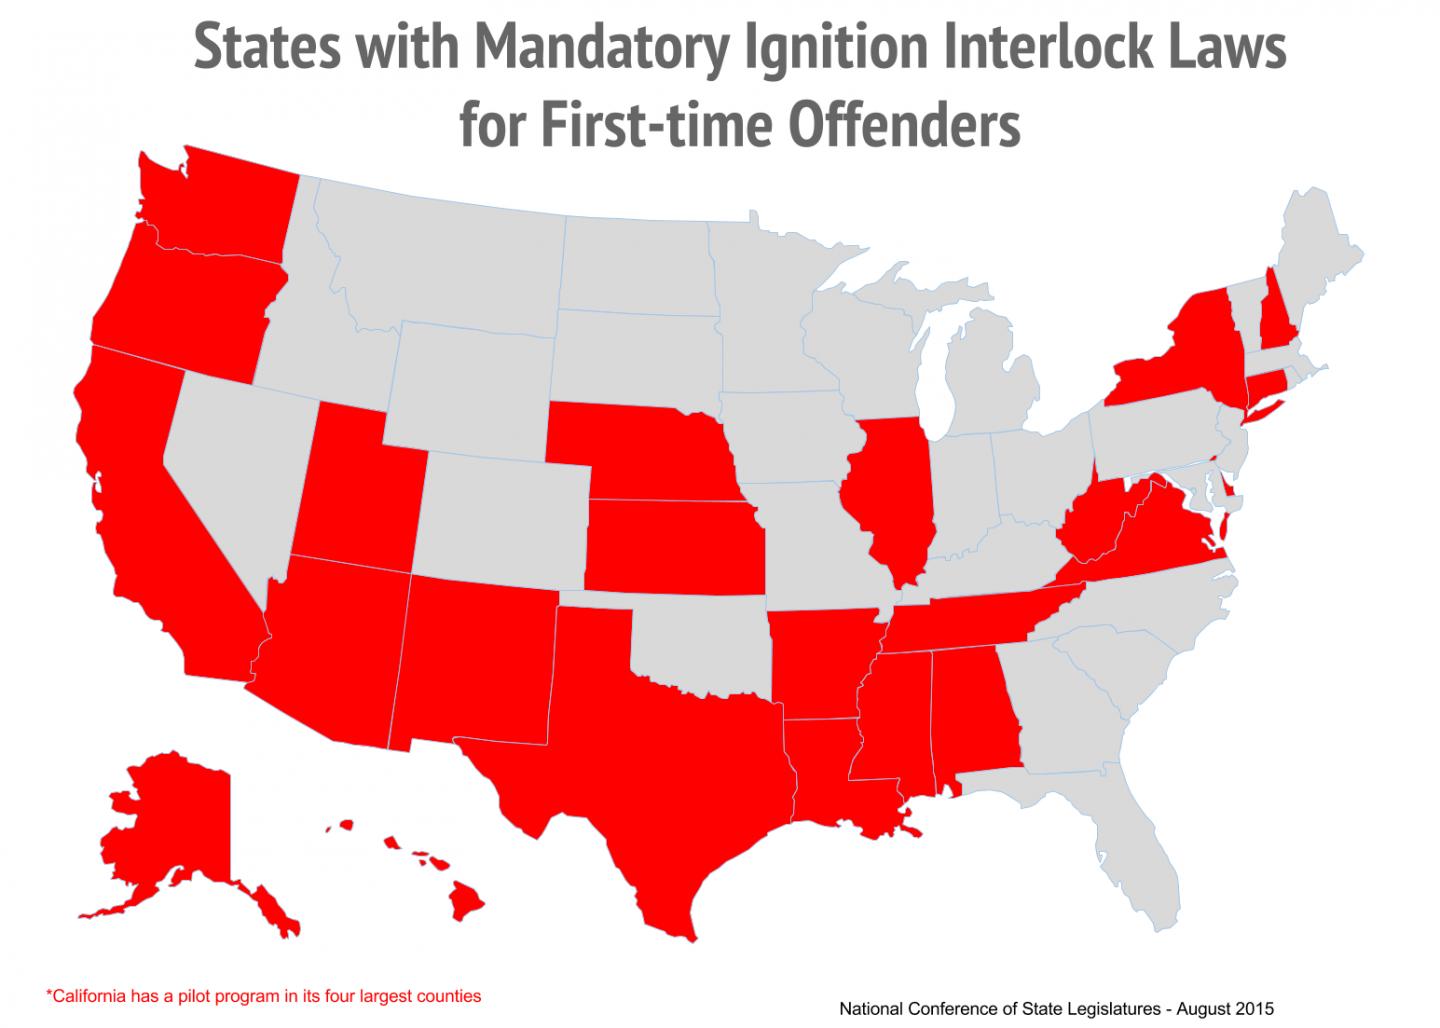 States with Mandatory Ignition-Interlock Laws for First-time DUI Offenders